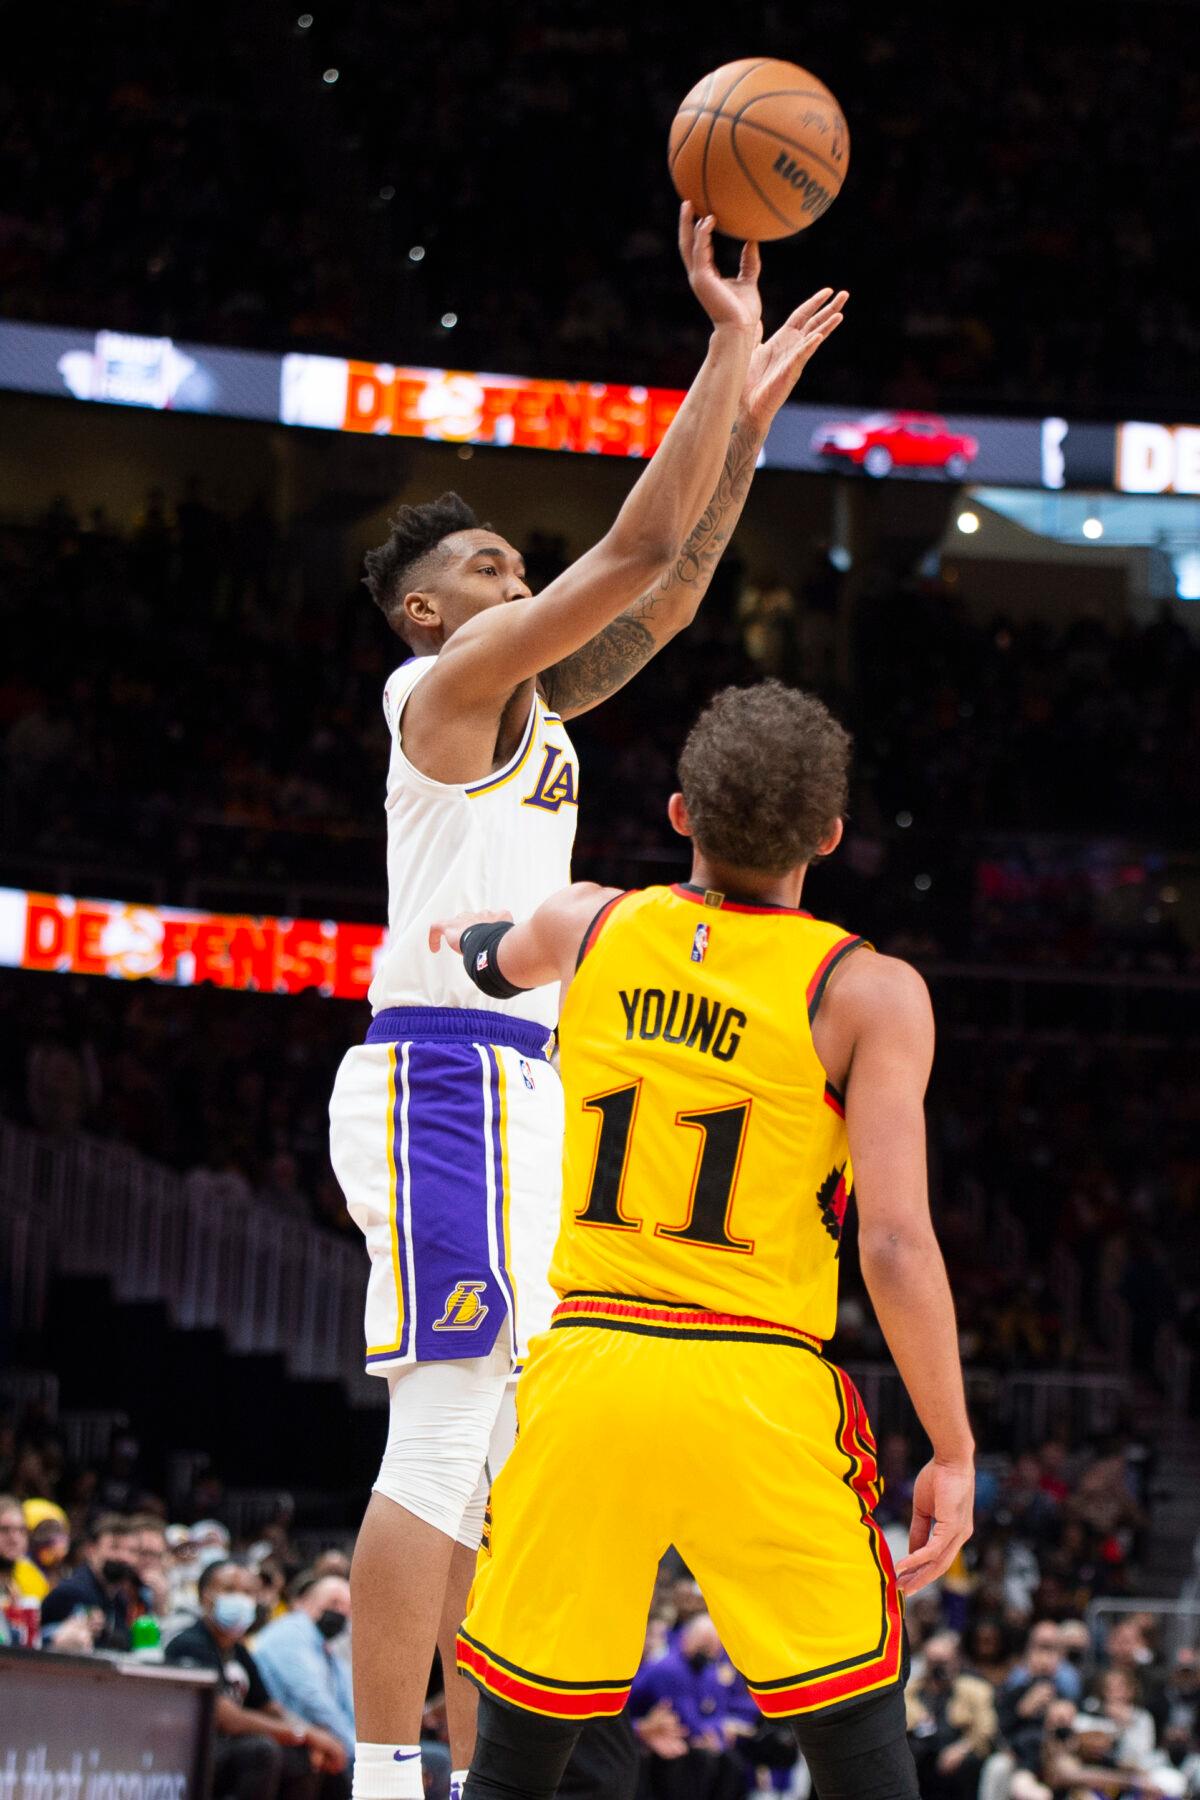 Los Angeles Lakers guard Malik Monk, left, shoots a 3-point basket over Atlanta Hawks guard Trae Young, right, during the second half of an NBA basketball game in Atlanta on Jan. 30, 2022. (Hakim Wright Sr./AP Photo)